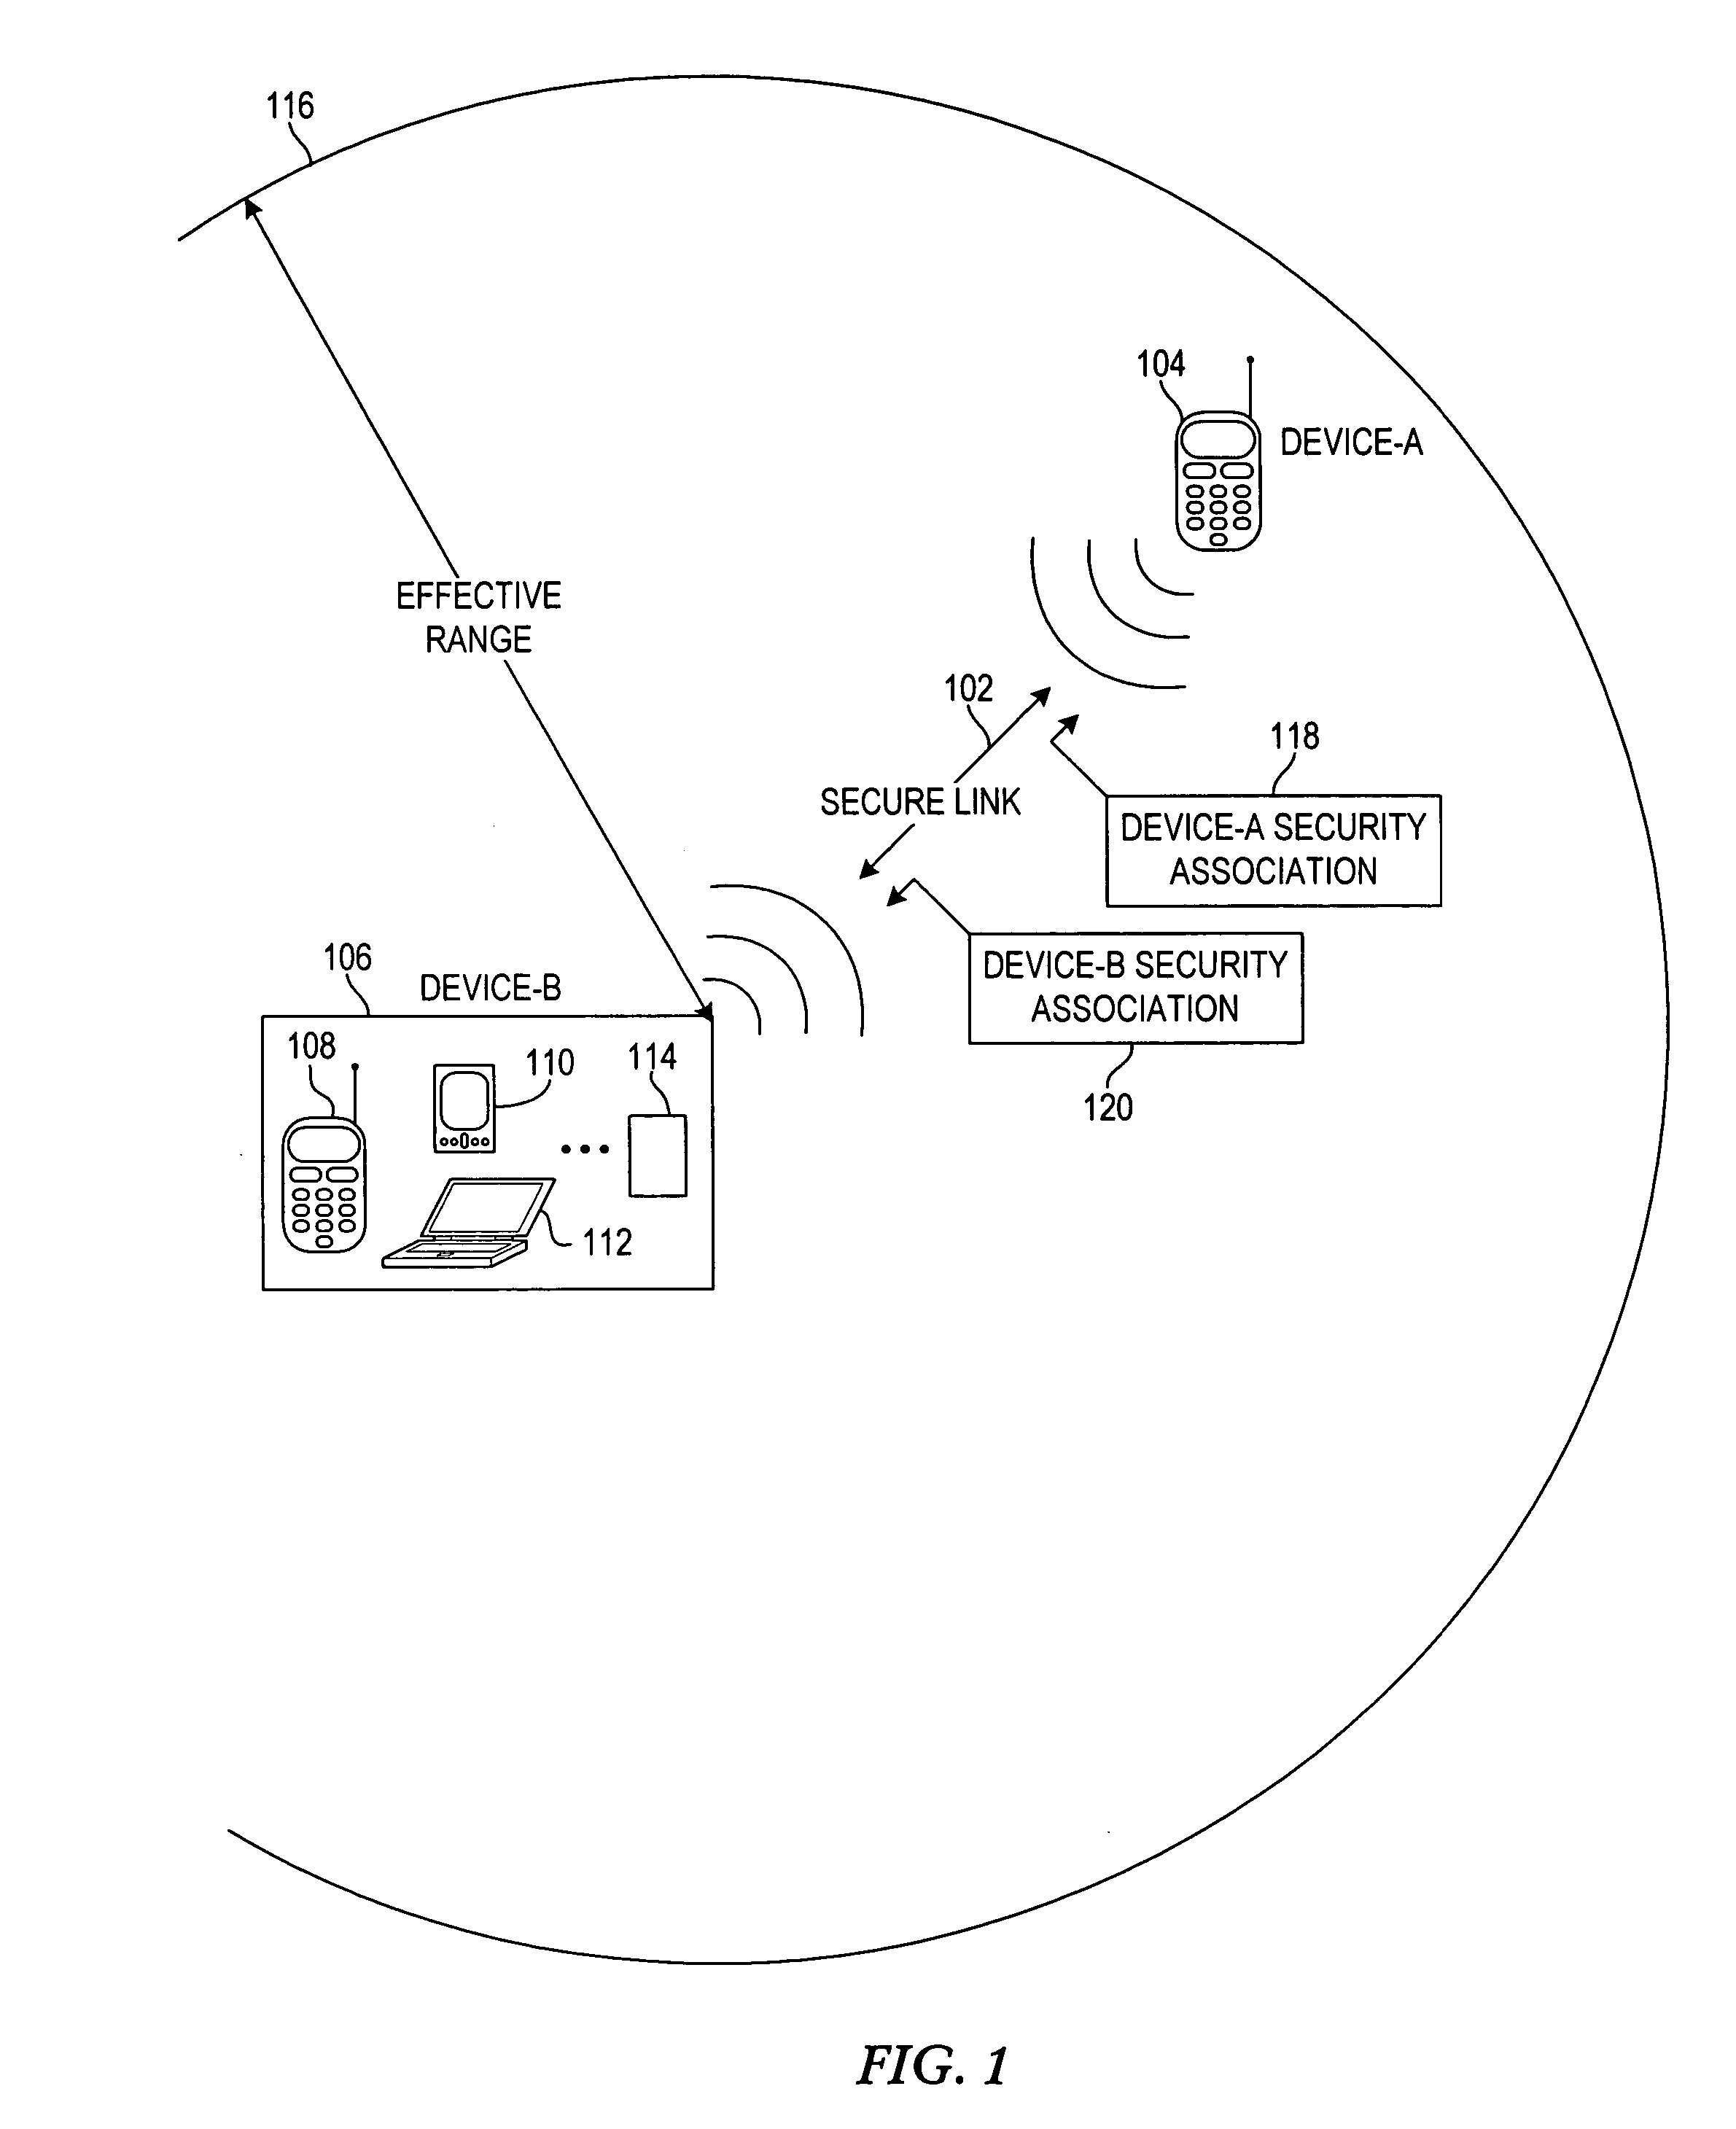 Linking security association to entries in a contact directory of a wireless device